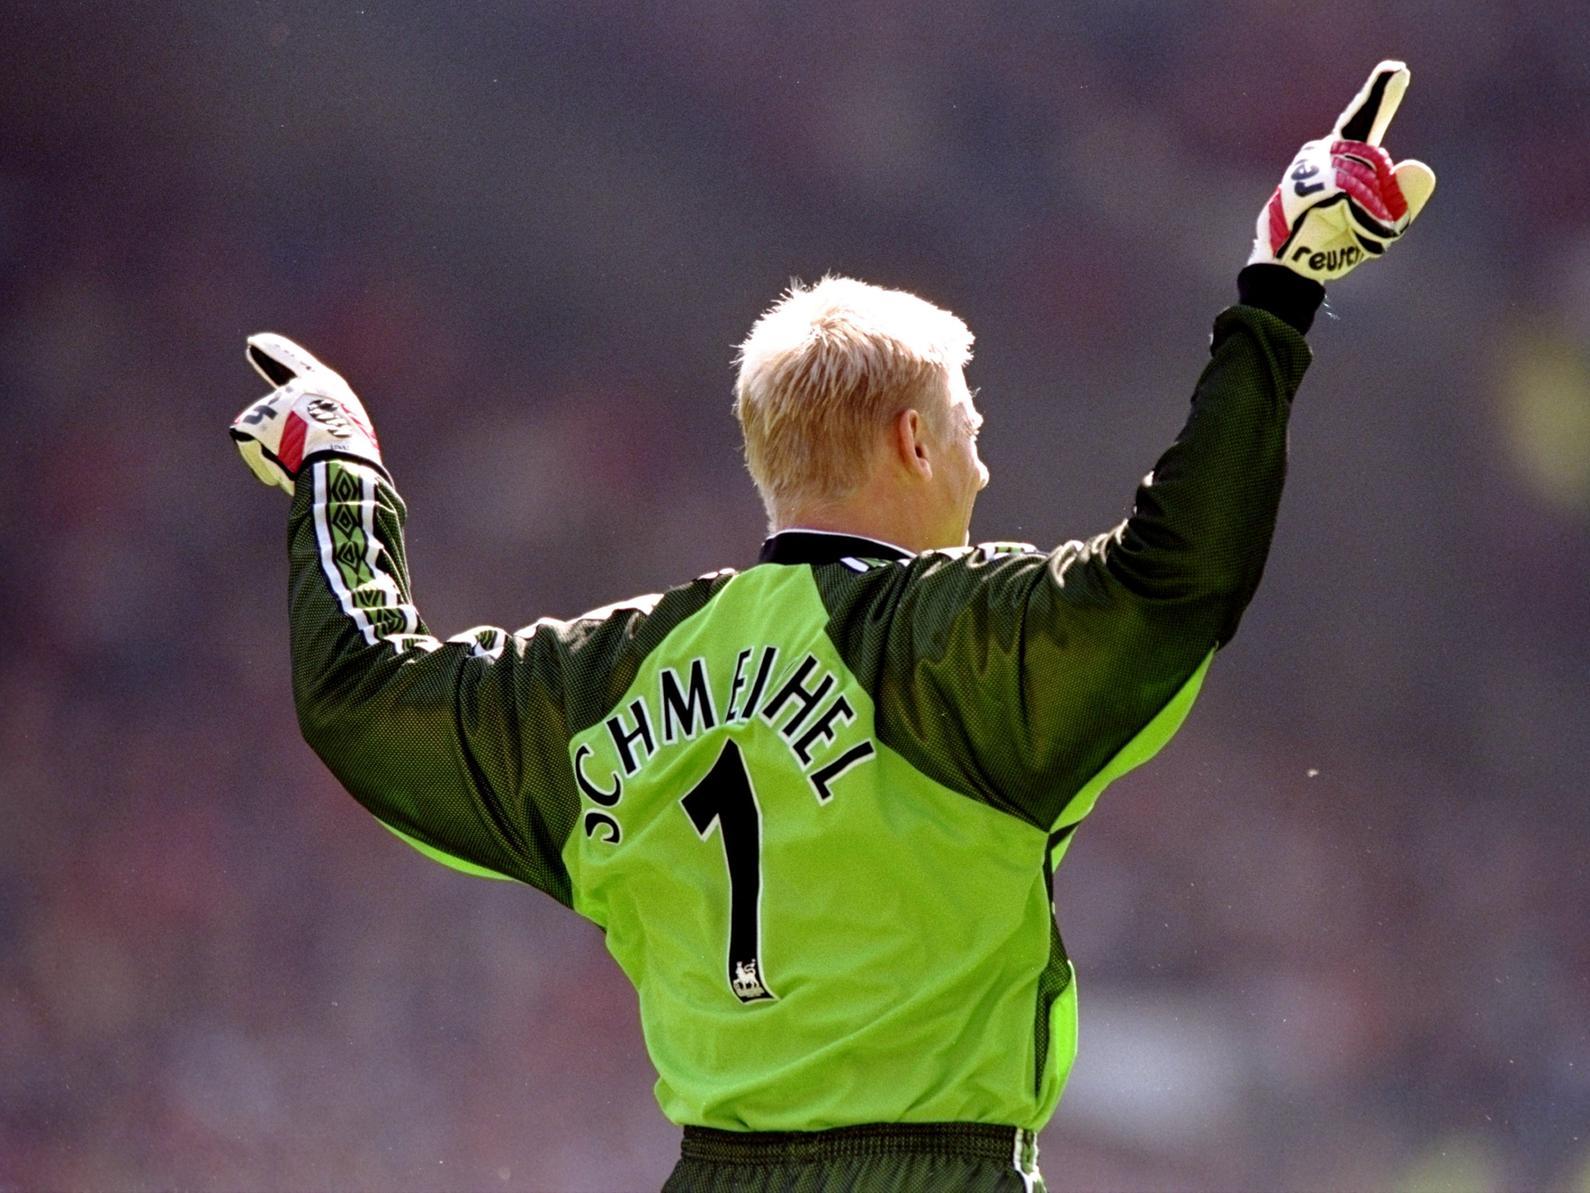 The Danish goalkeeper was a fearsome presence between the sticks for Manchester United over seven seasons in the Premier League, winning five league titles a Player of the Season award to boot.